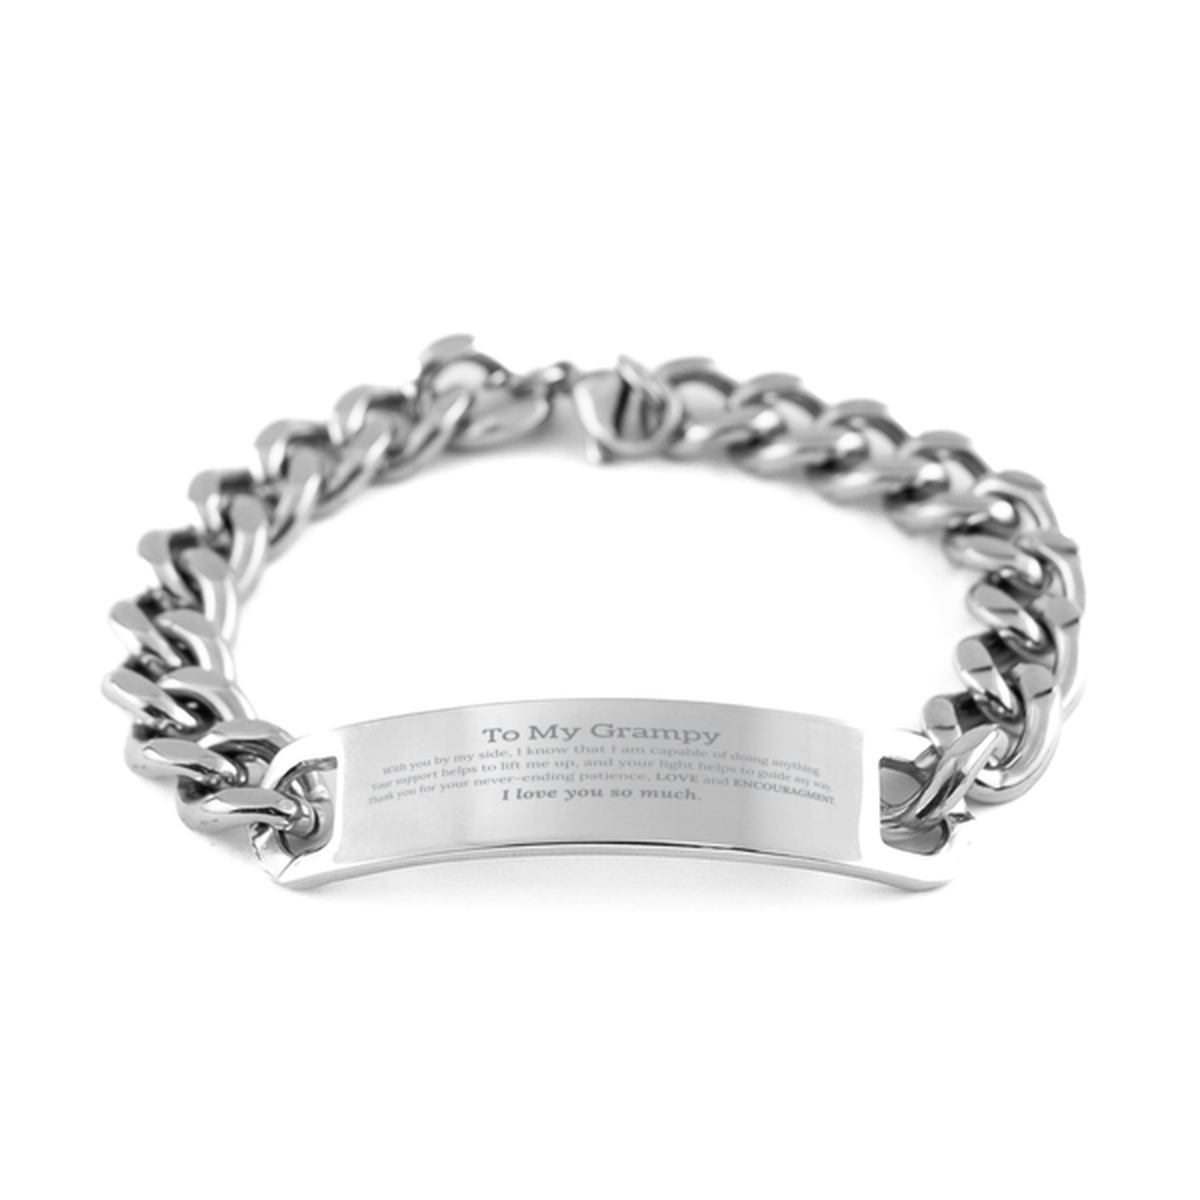 Appreciation Grampy Cuban Chain Stainless Steel Bracelet Gifts, To My Grampy Birthday Christmas Wedding Keepsake Gifts for Grampy With you by my side, I know that I am capable of doing anything. I love you so much